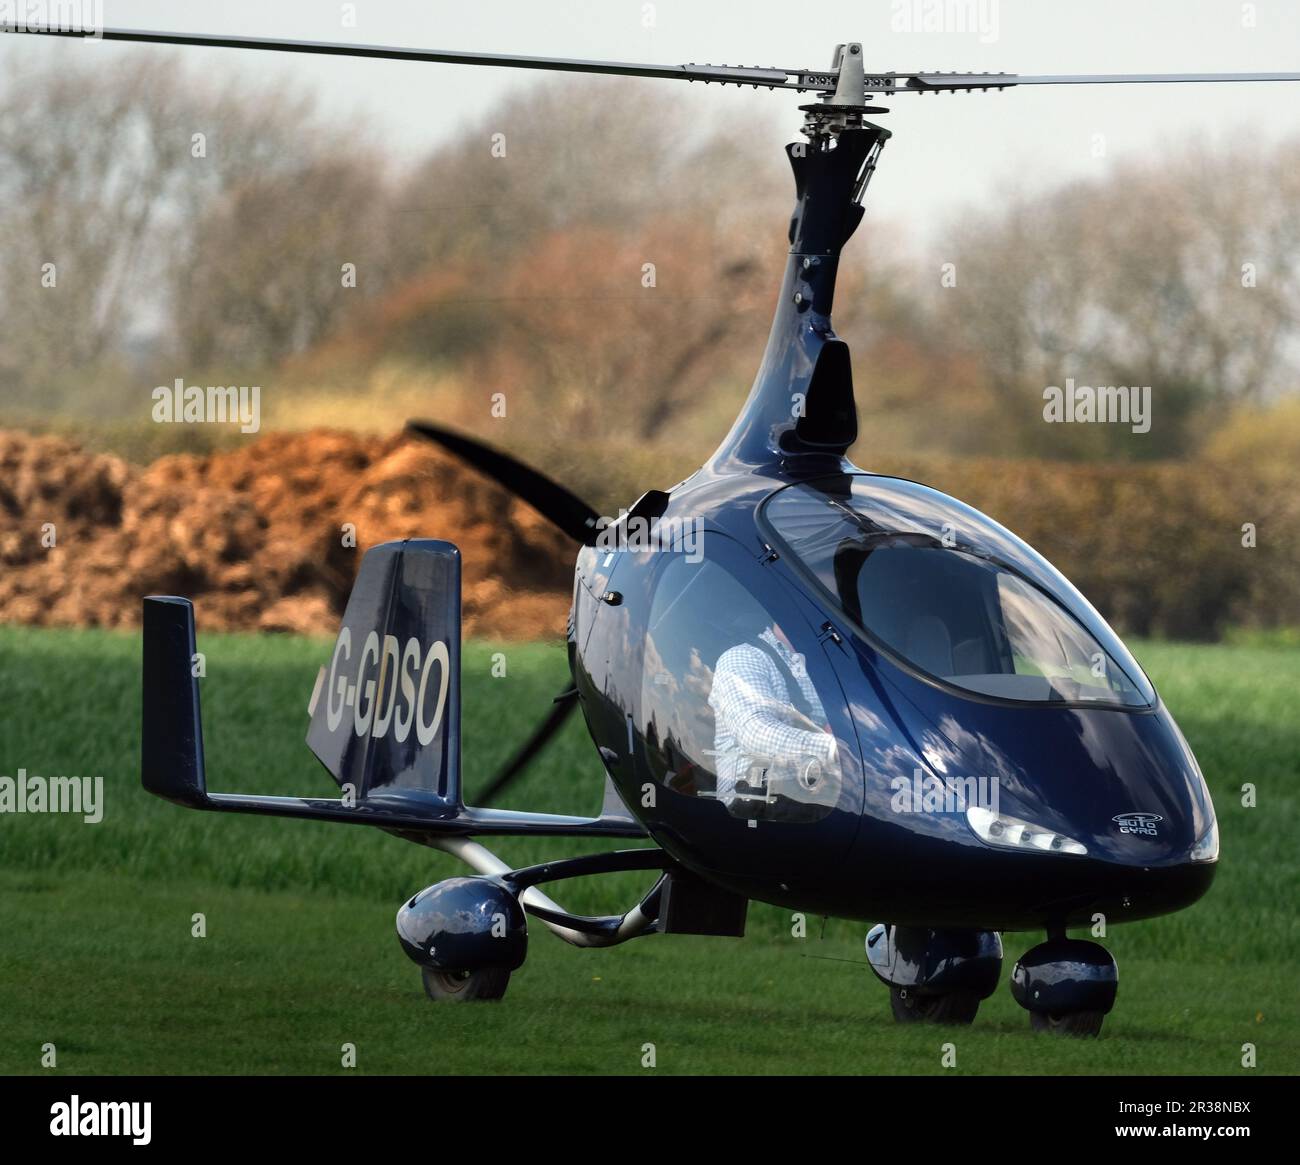 Modern autogyro aircraft visiting flying club in the UK. Stock Photo